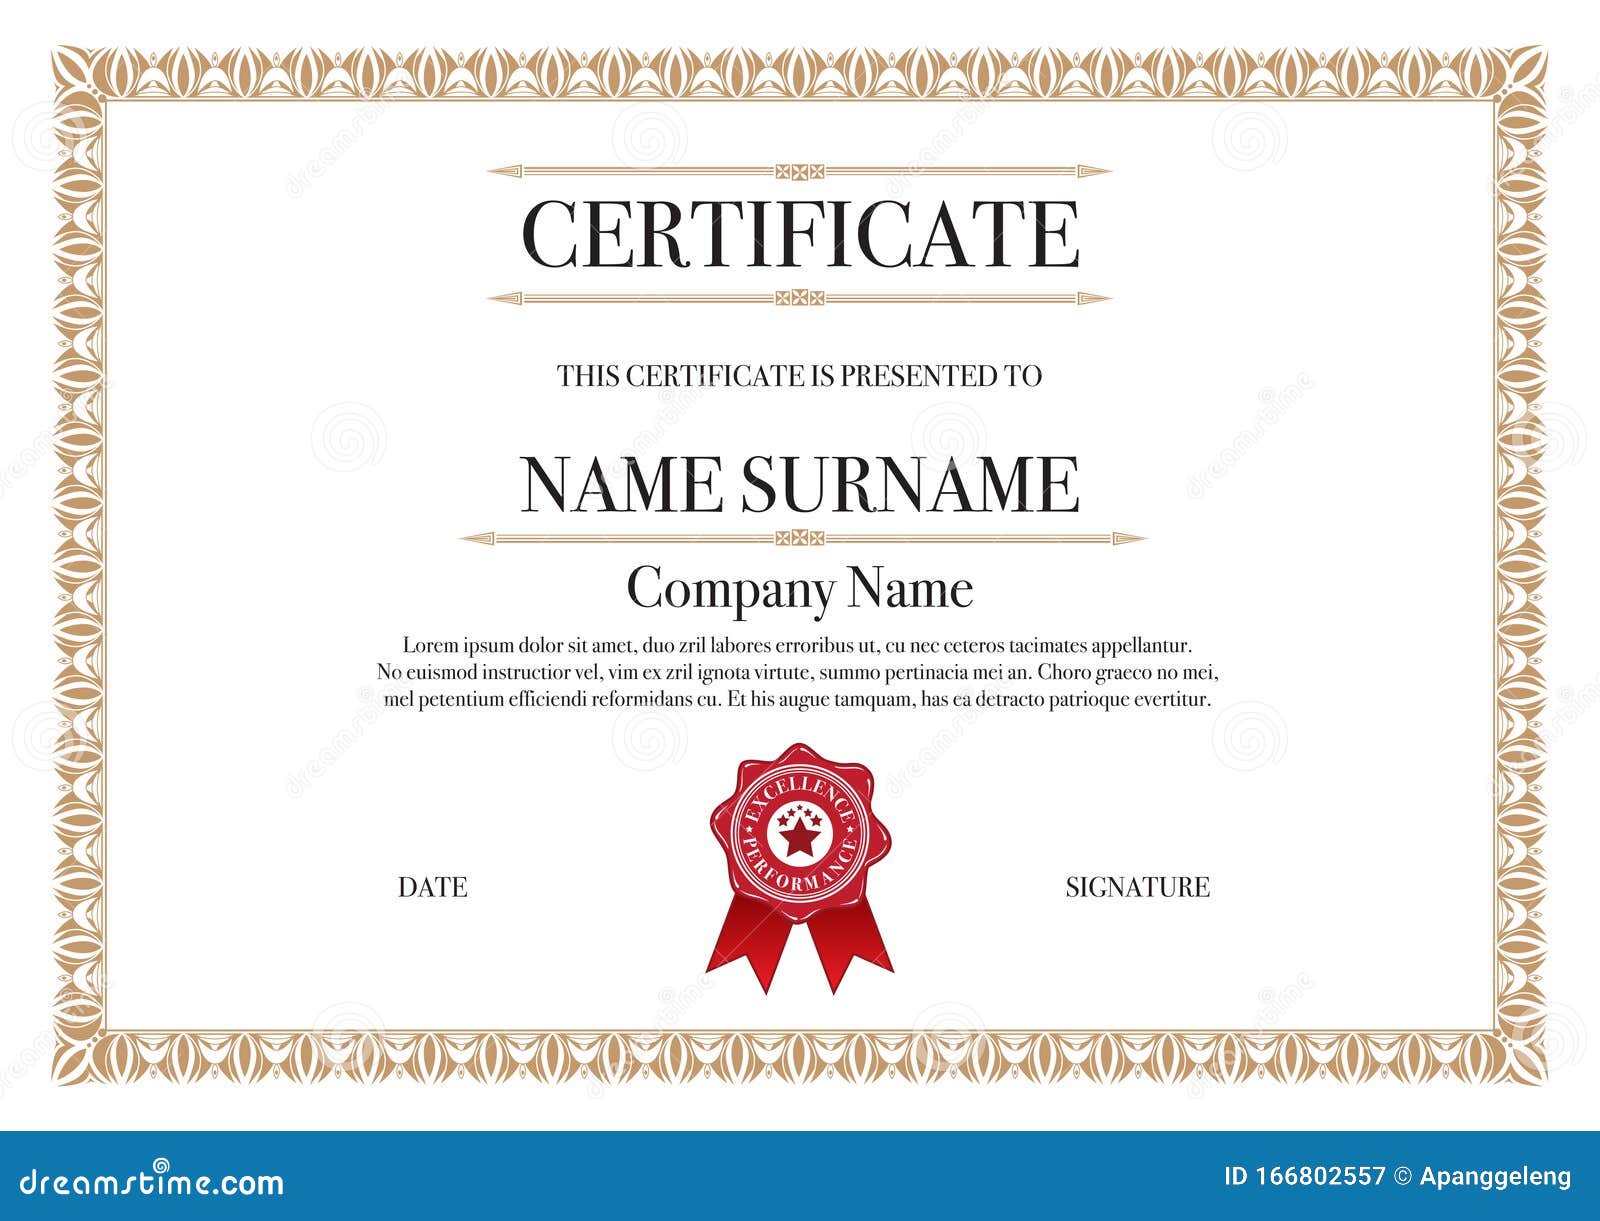 Download Certificate Border With Text Template, Just Remove Text ...